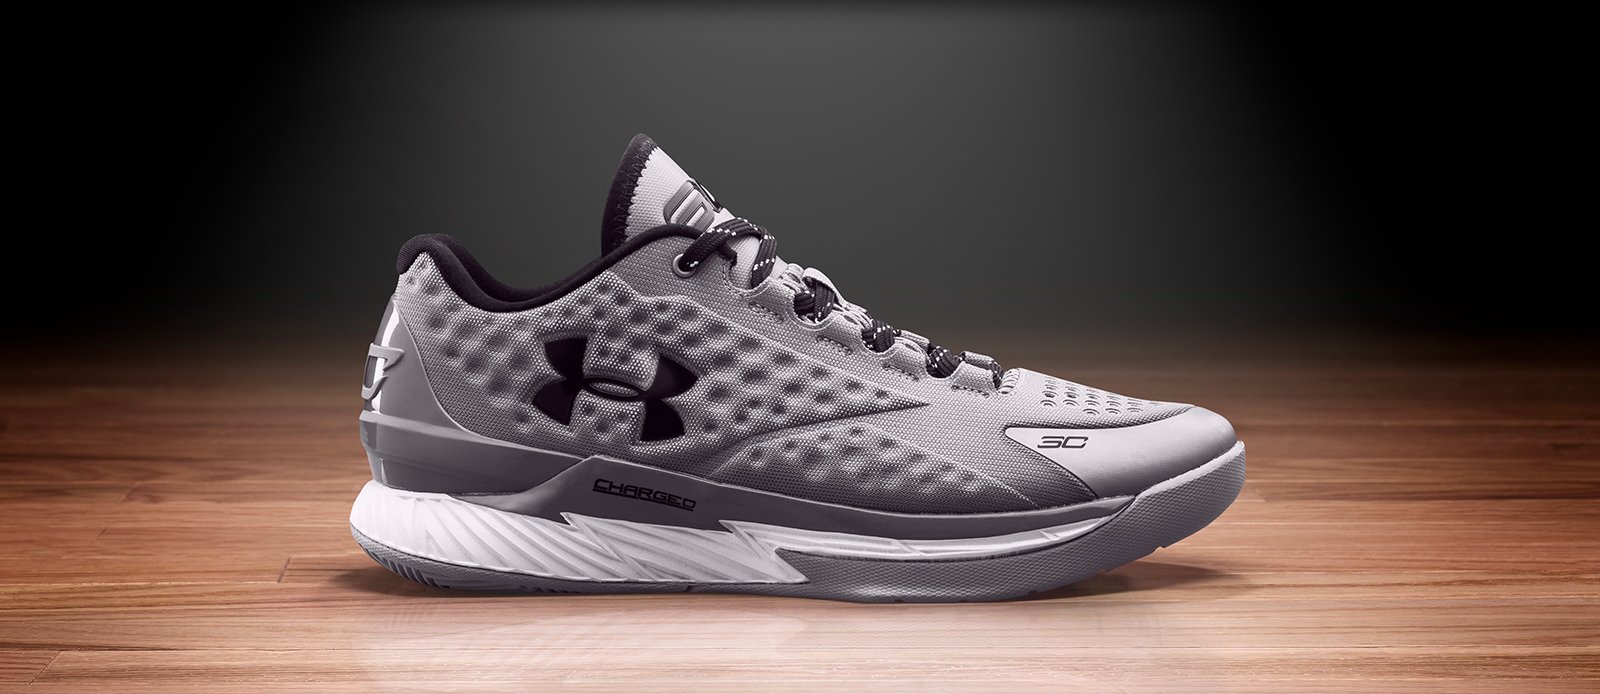 Under Armour Curry One Low 'Two-A-Days' Pack - Available Now - WearTesters